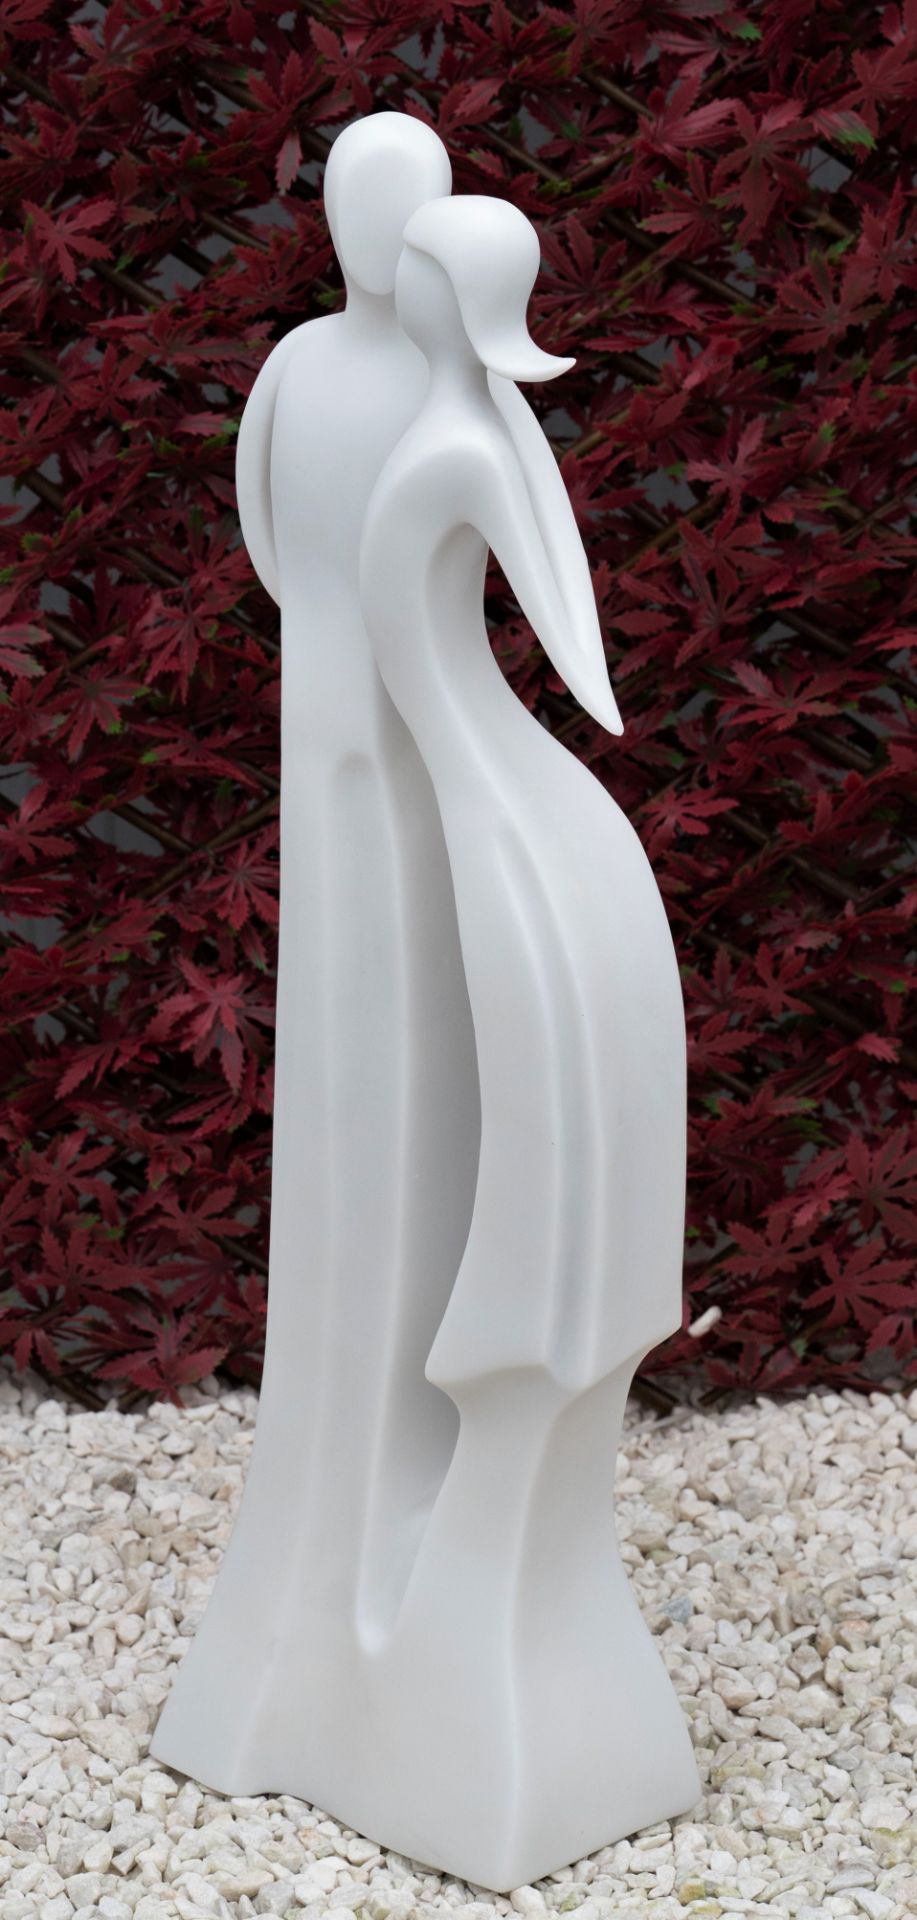 GORGEOUS TERRAZO MARBLE "FIRST DATE" GARDEN STATUE - Image 5 of 6